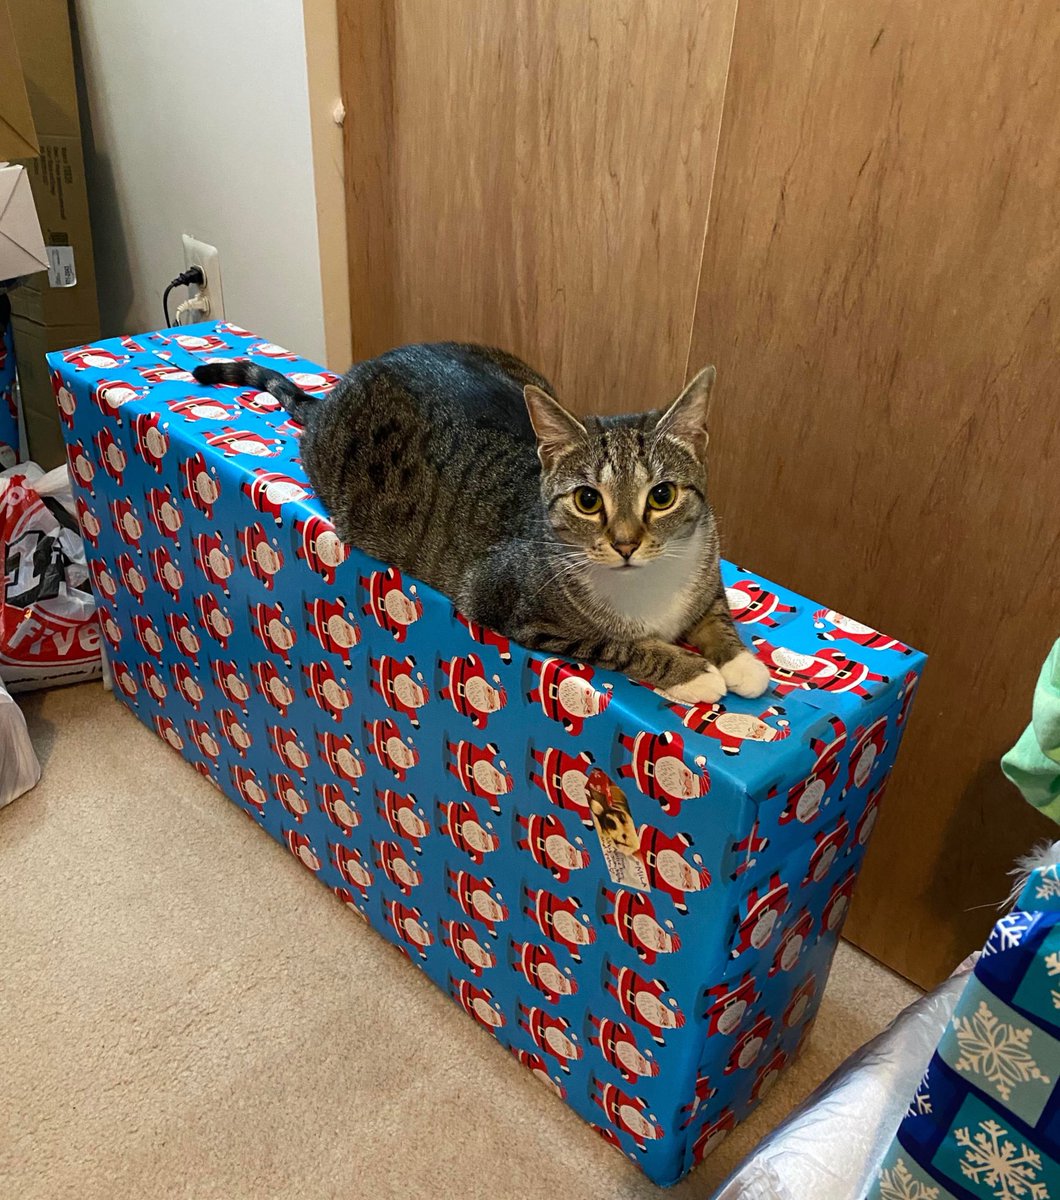 And when cats cannot attack a Christmas tree directly, they may make a stealth attack on your gifts.  #CatsHateChristmas  #WarOnChristmas   https://www.reddit.com/r/ChristmasCats/comments/eipdee/merry_christmas_to_meee_merry_christmas_to_meee/